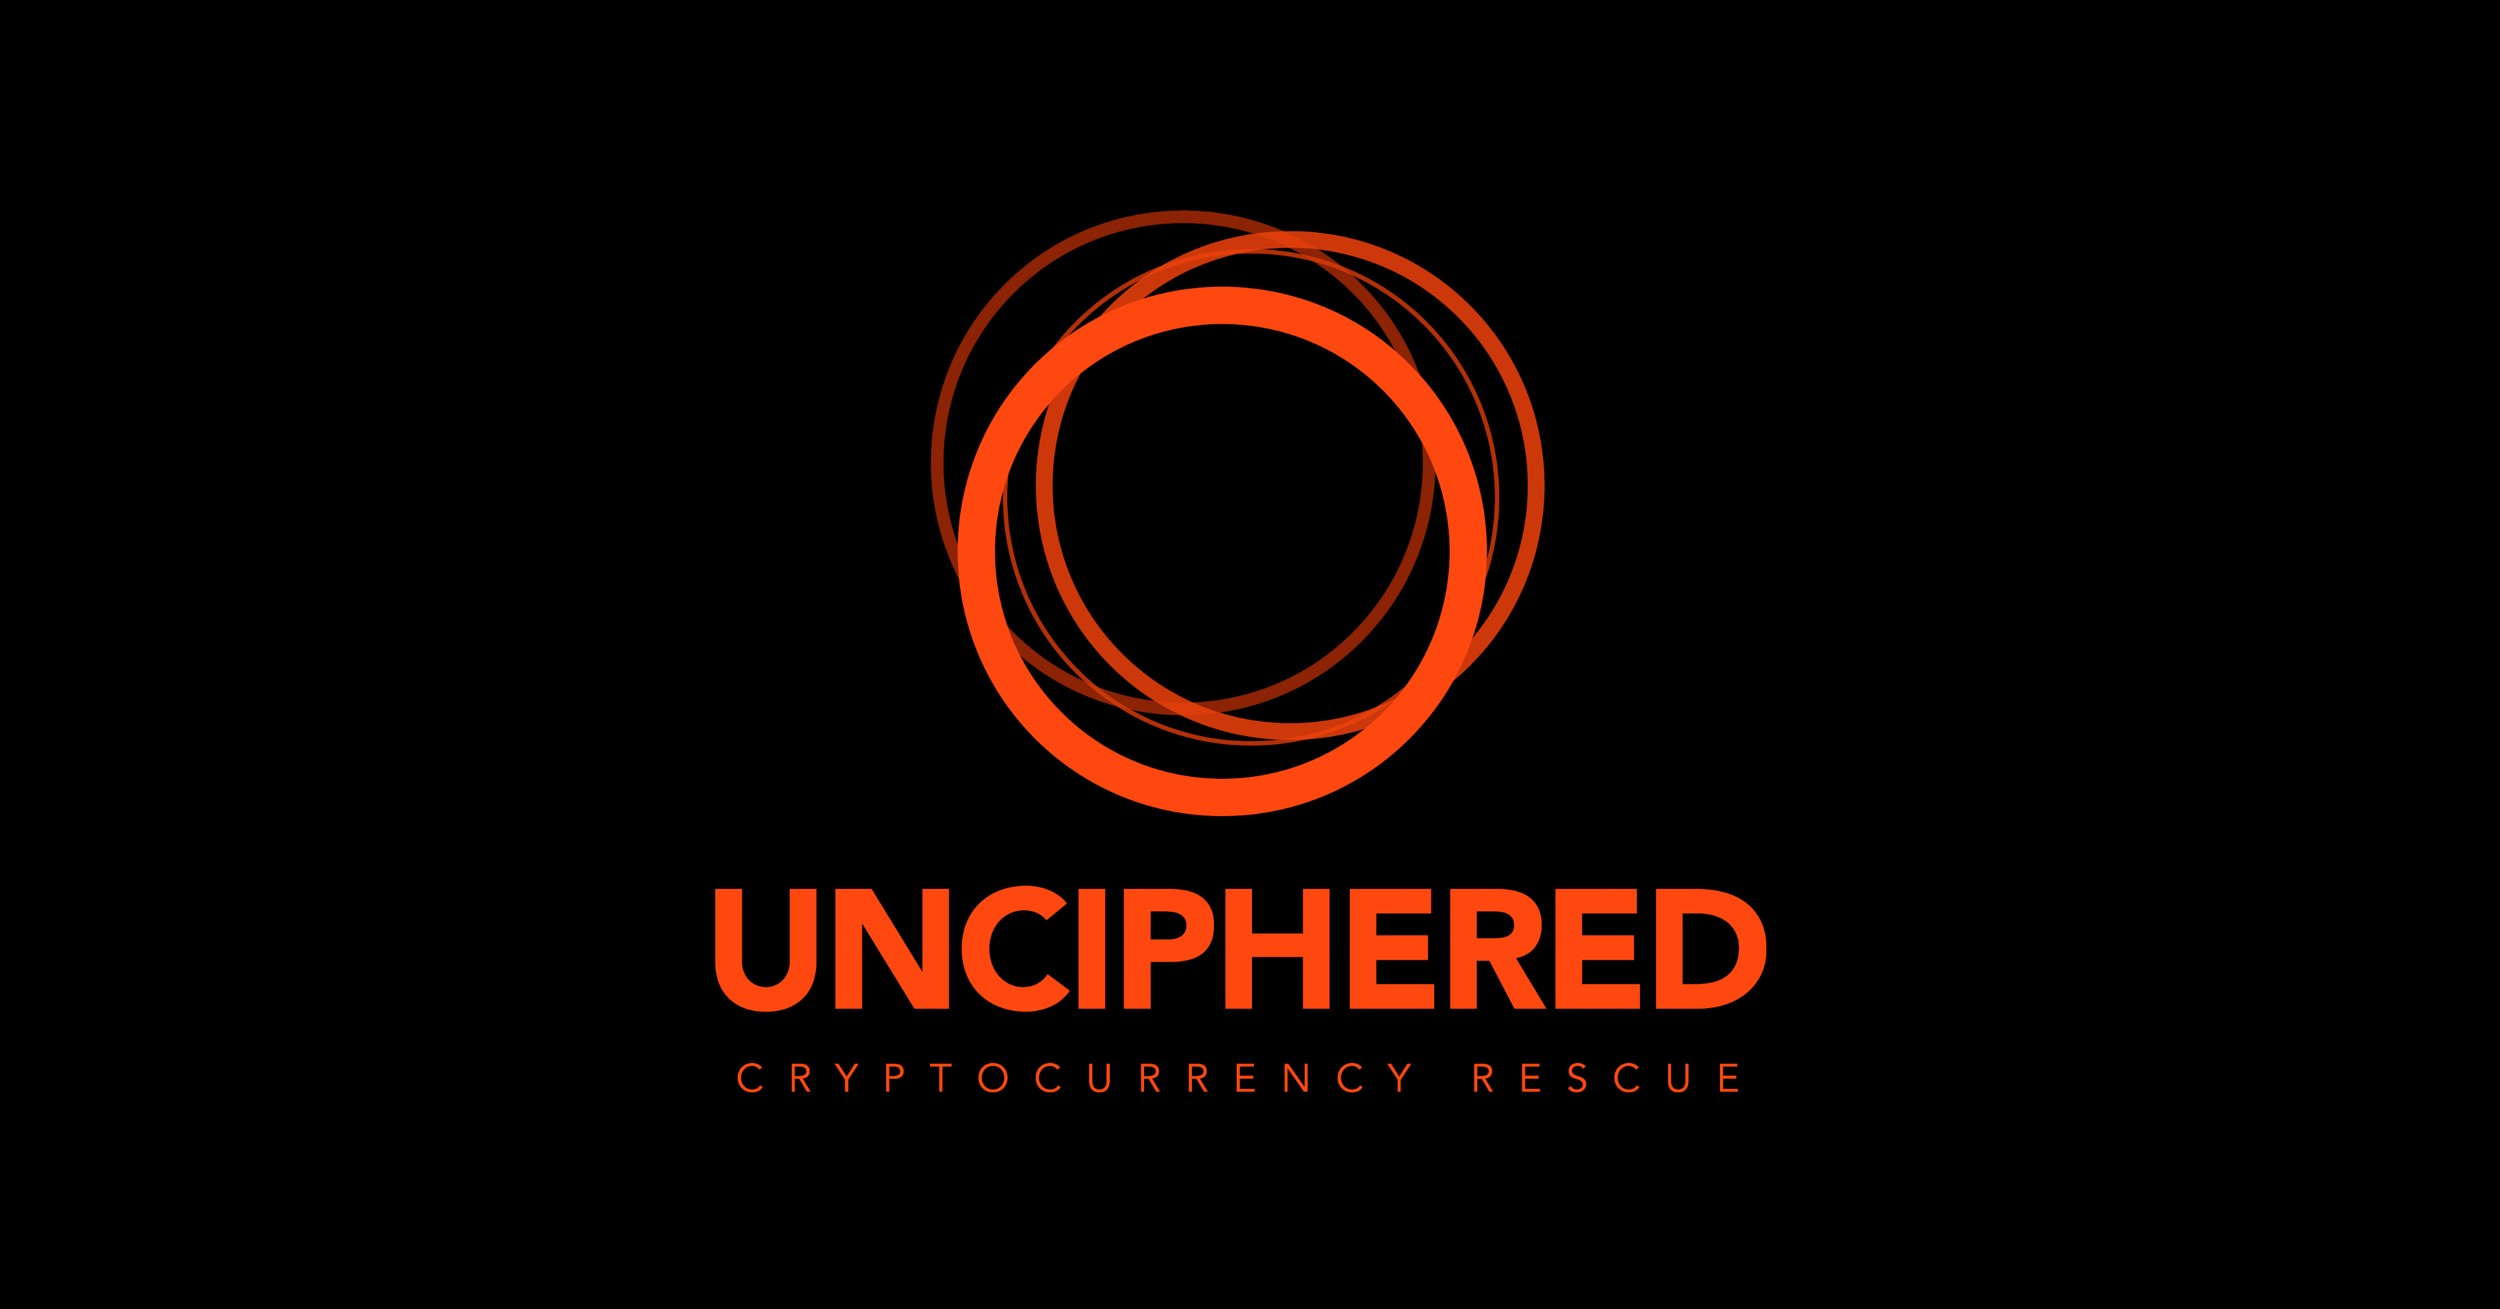 Unciphered Steps In: A Potential Solution to $244M Locked Bitcoin